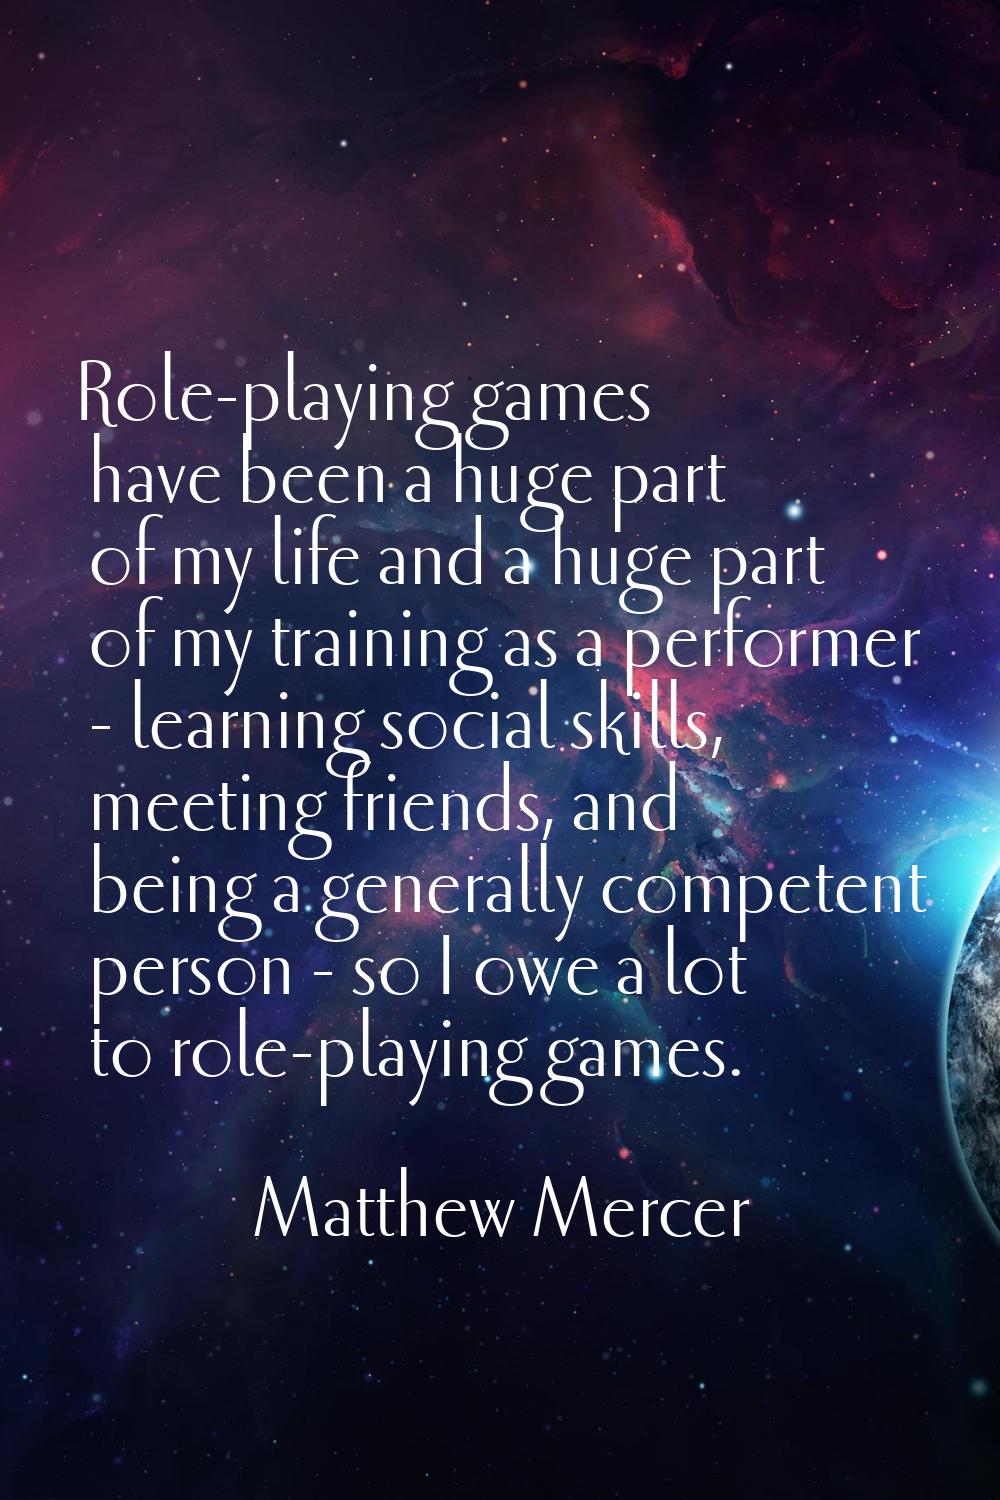 Role-playing games have been a huge part of my life and a huge part of my training as a performer -